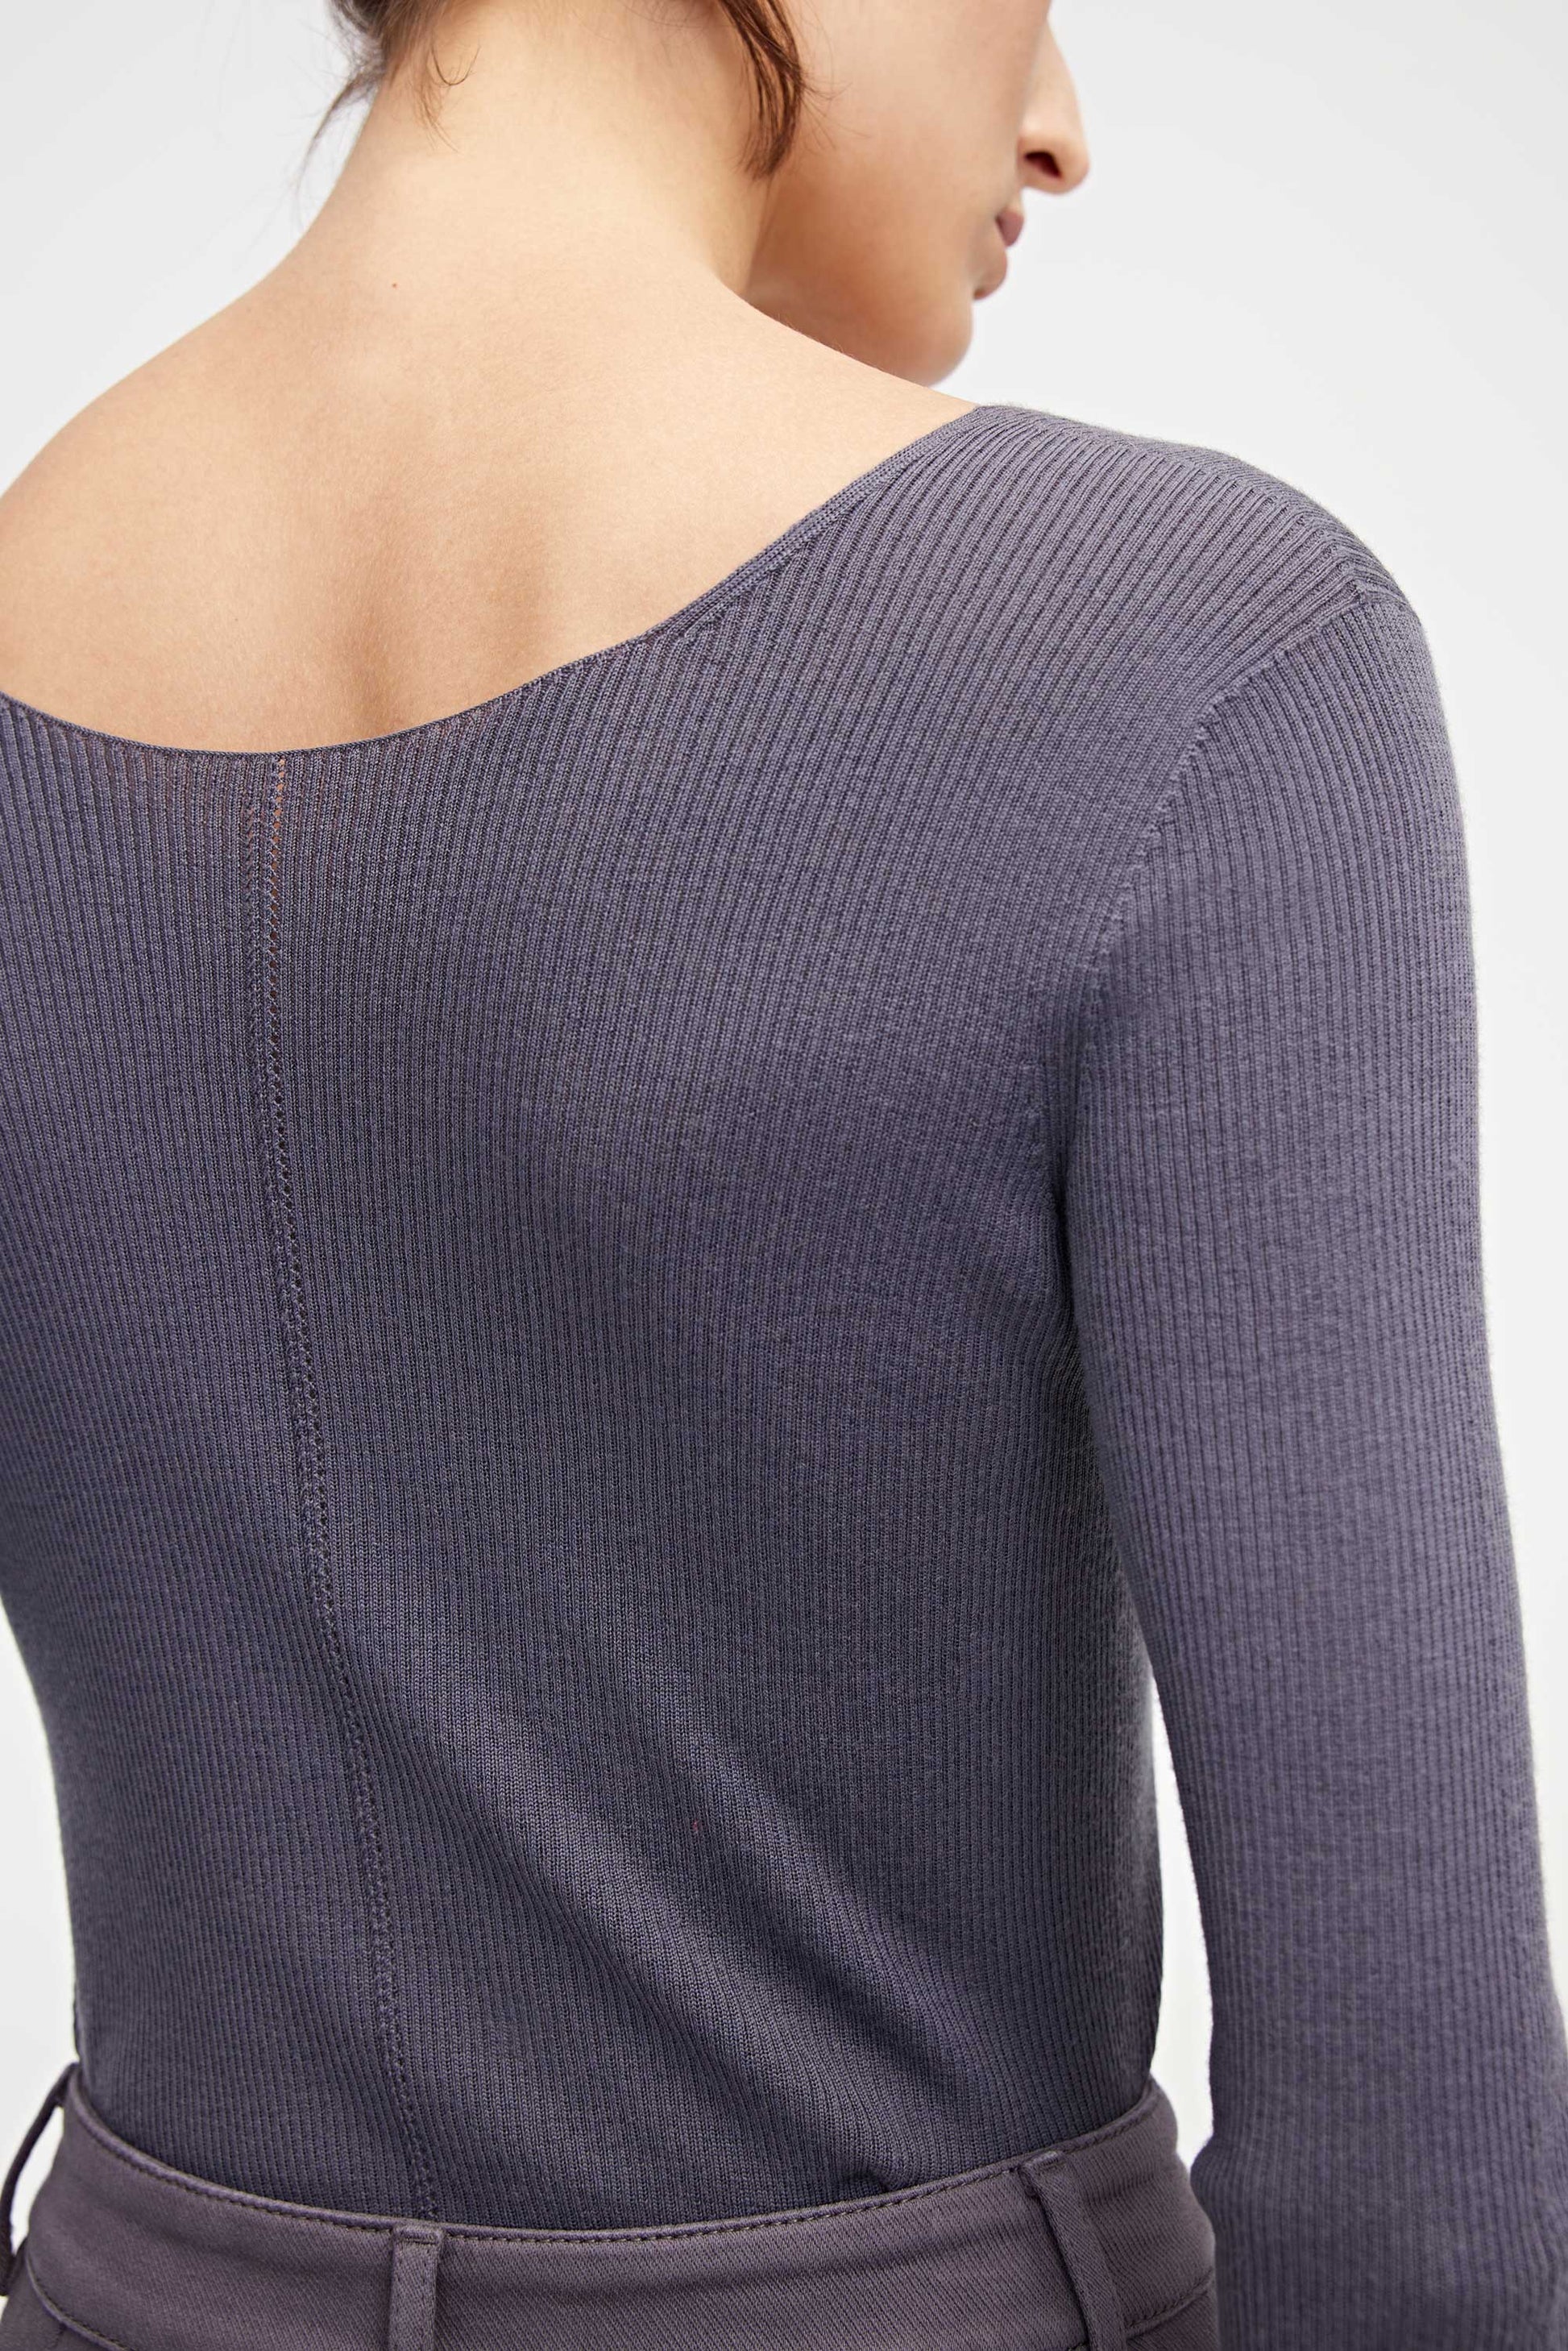 back of woman in purple v neck sweater